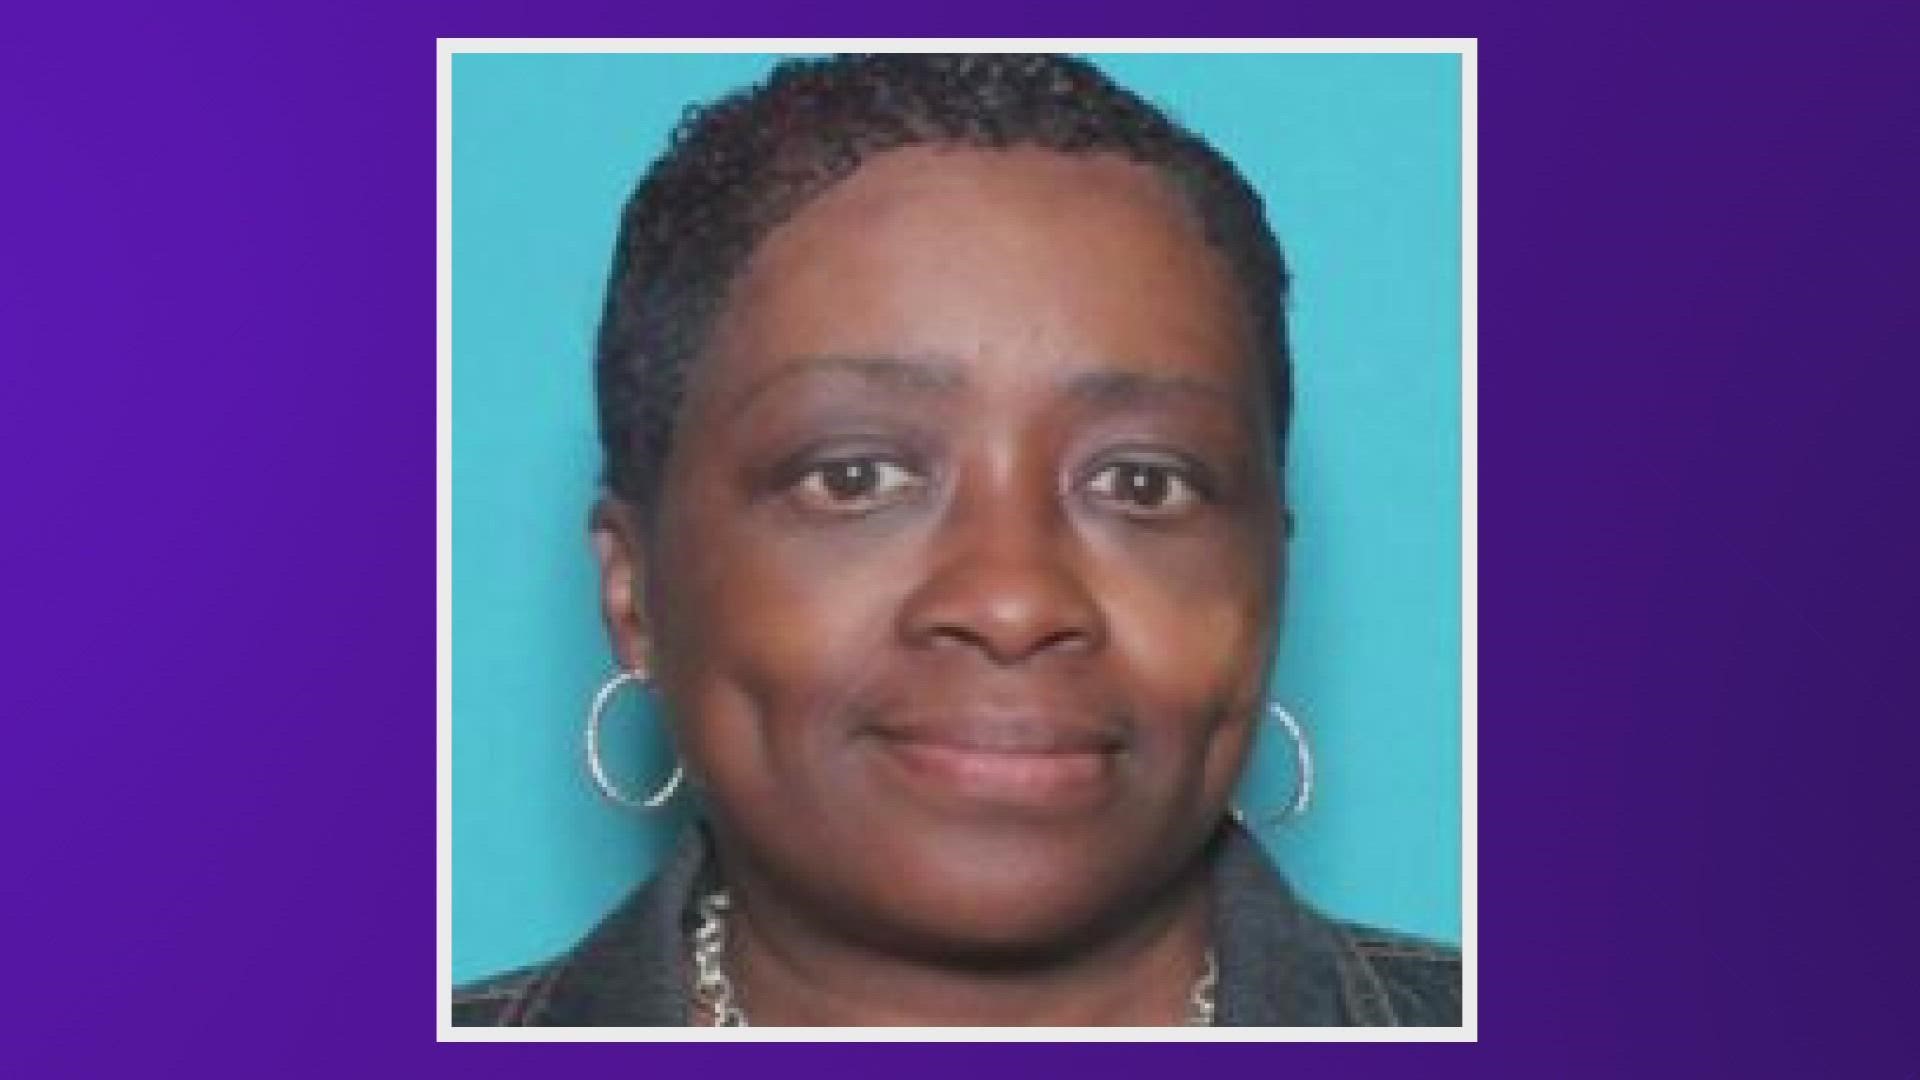 Vanessa Hendrix Lewis was last seen on the morning of Nov. 25 at her residence.